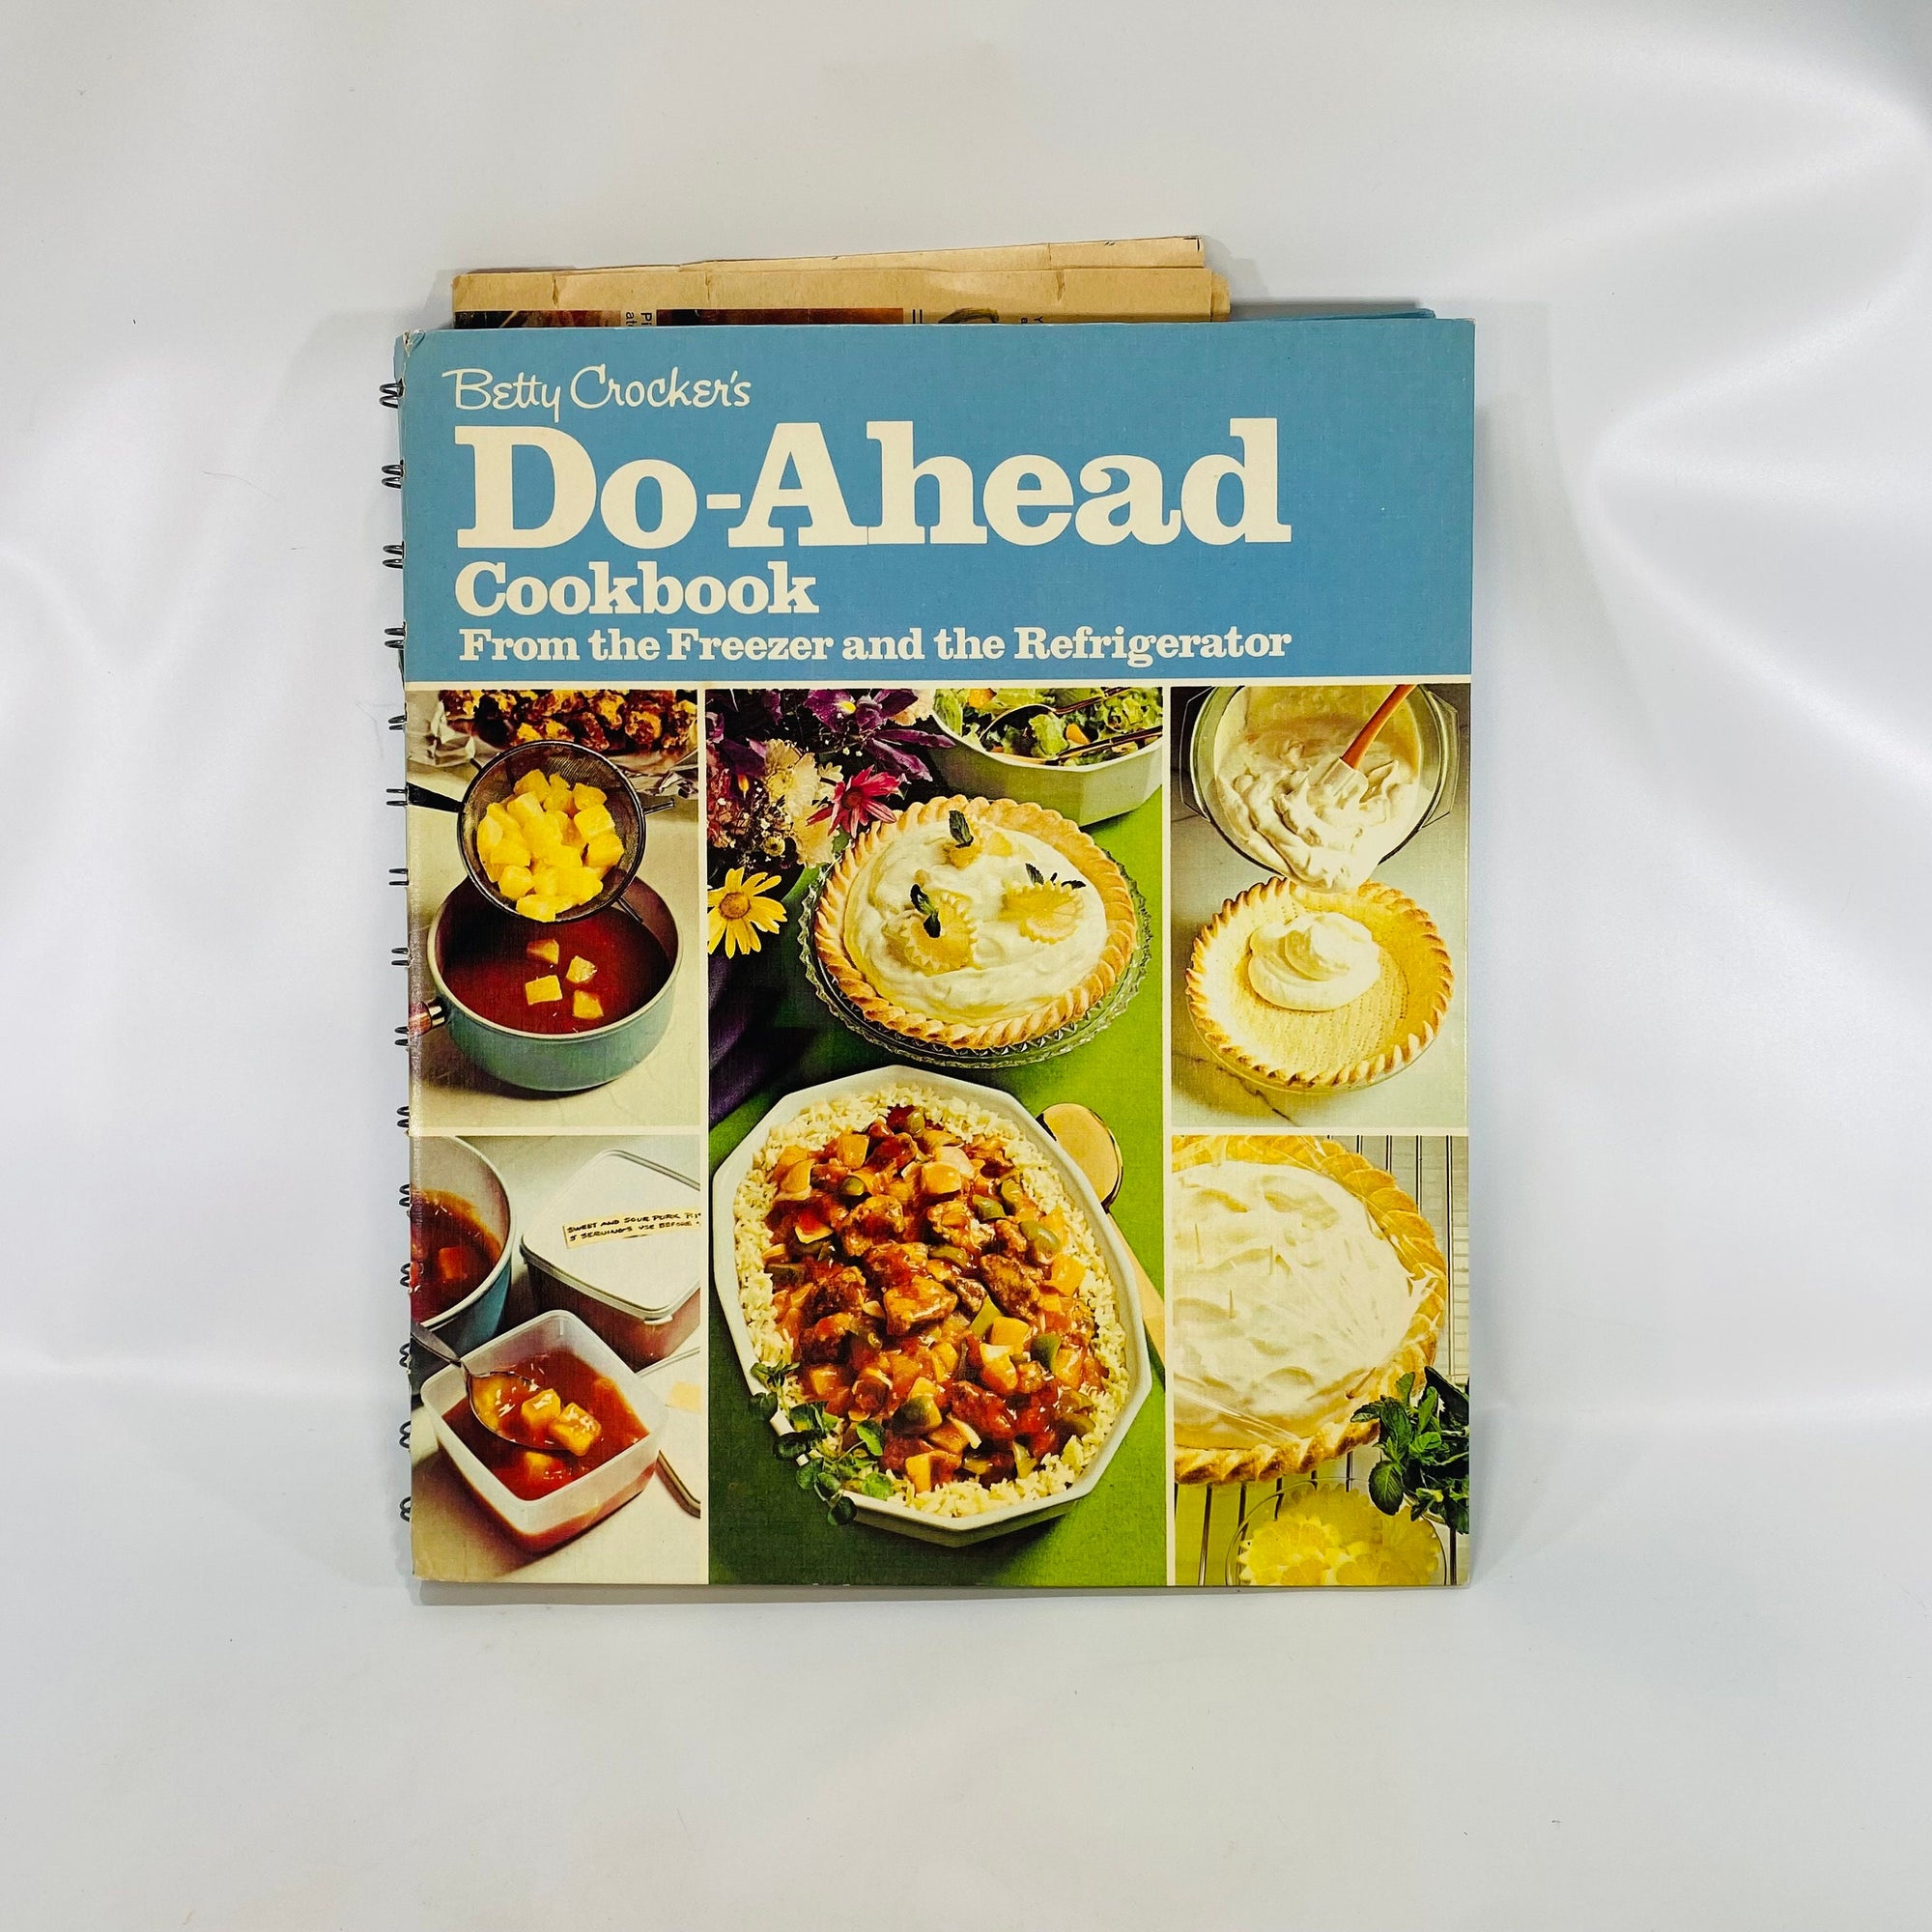 Betty Crocker's Do-Ahead Cookbook From the Freezer and the Refrigerator 1972  Vintage Cookbook